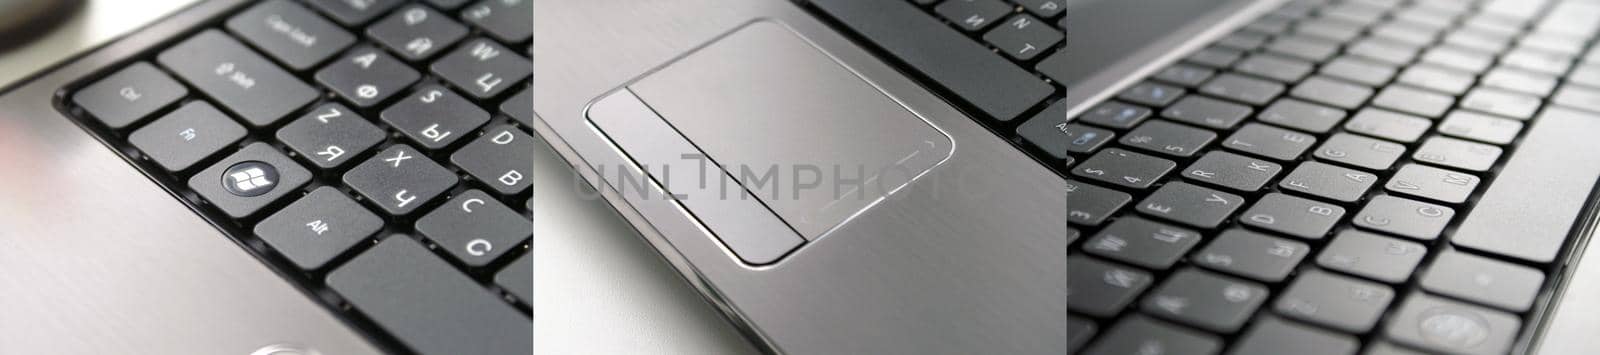 Clean new laptop with russian keyboard by BEMPhoto